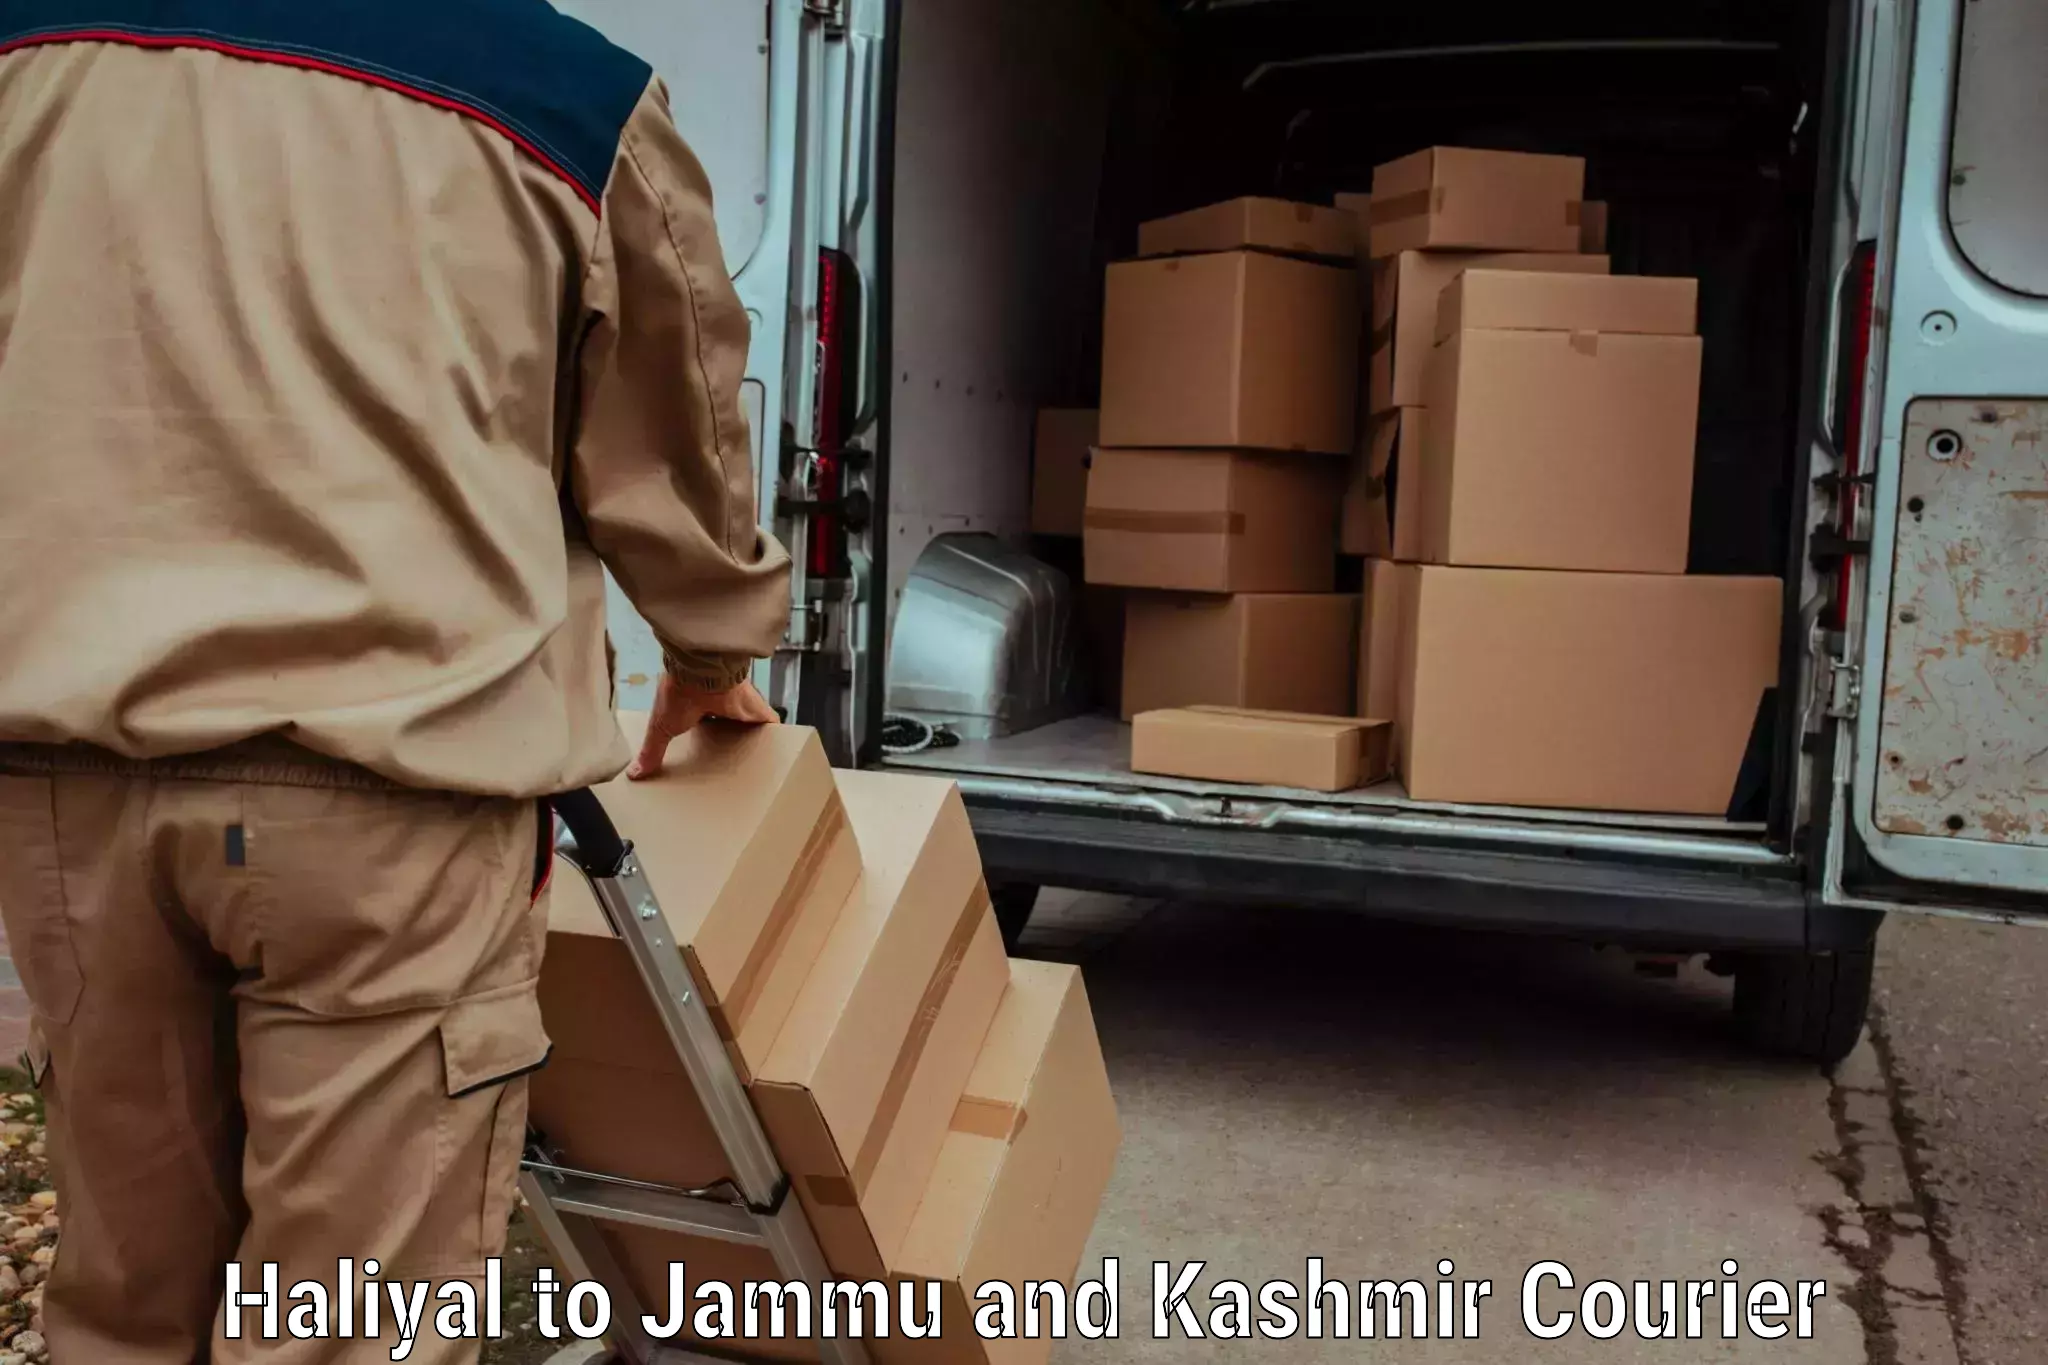 Subscription-based courier Haliyal to University of Jammu